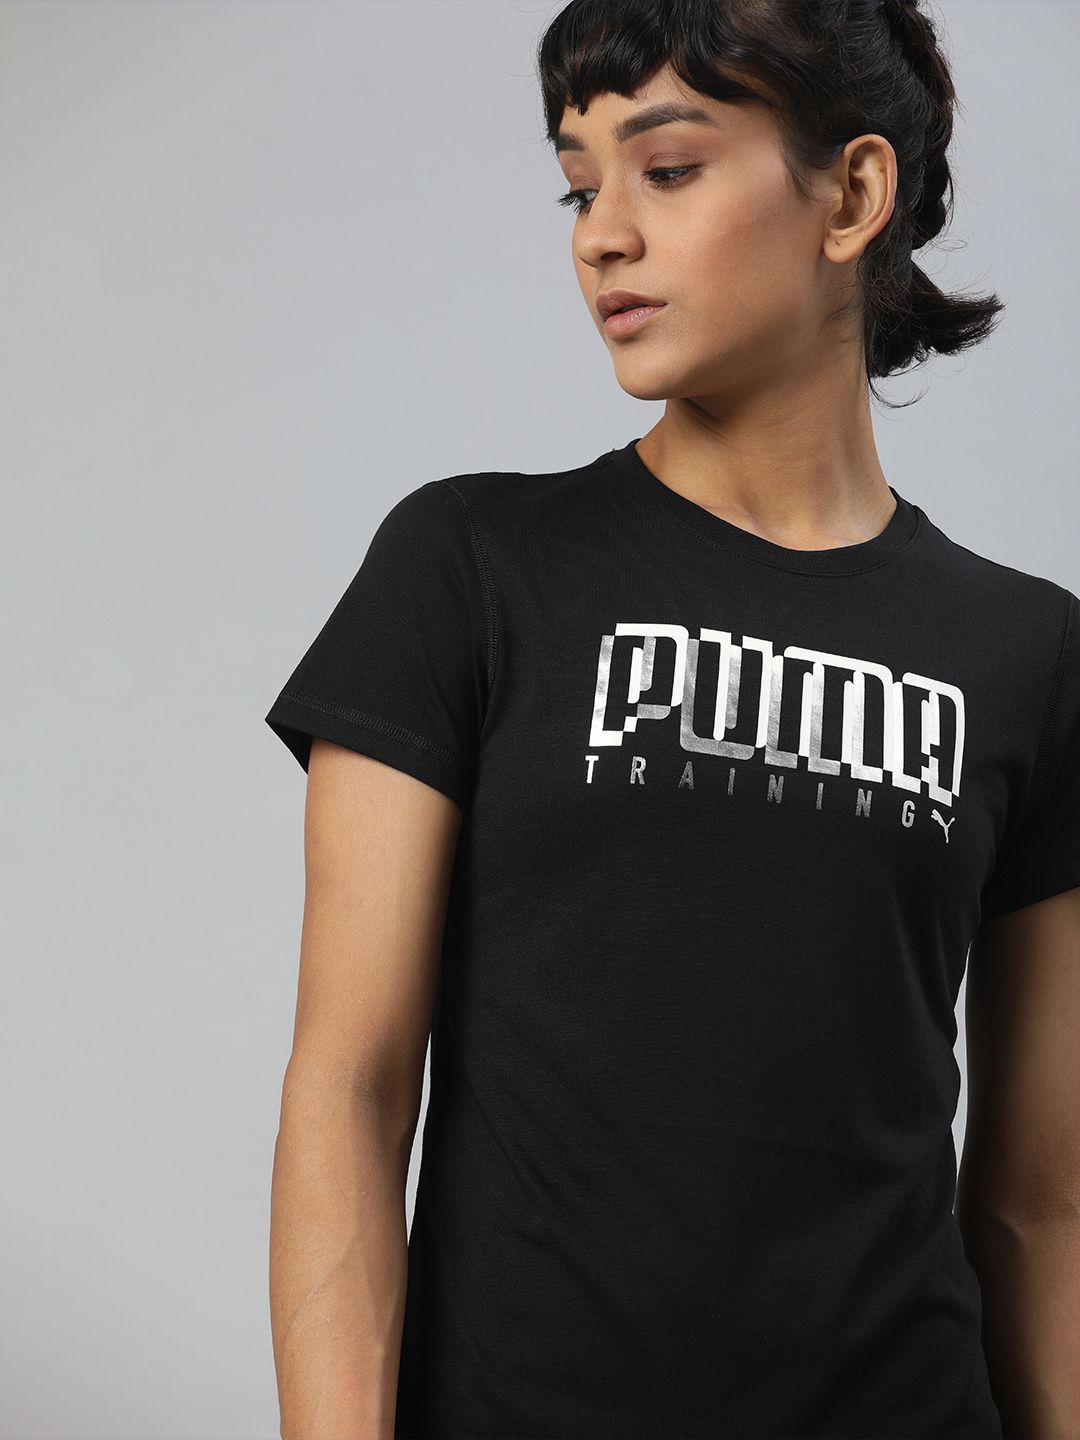 Puma Women Black Performance Branded Printed dryCELL Round Neck Training T-shirt Price in India